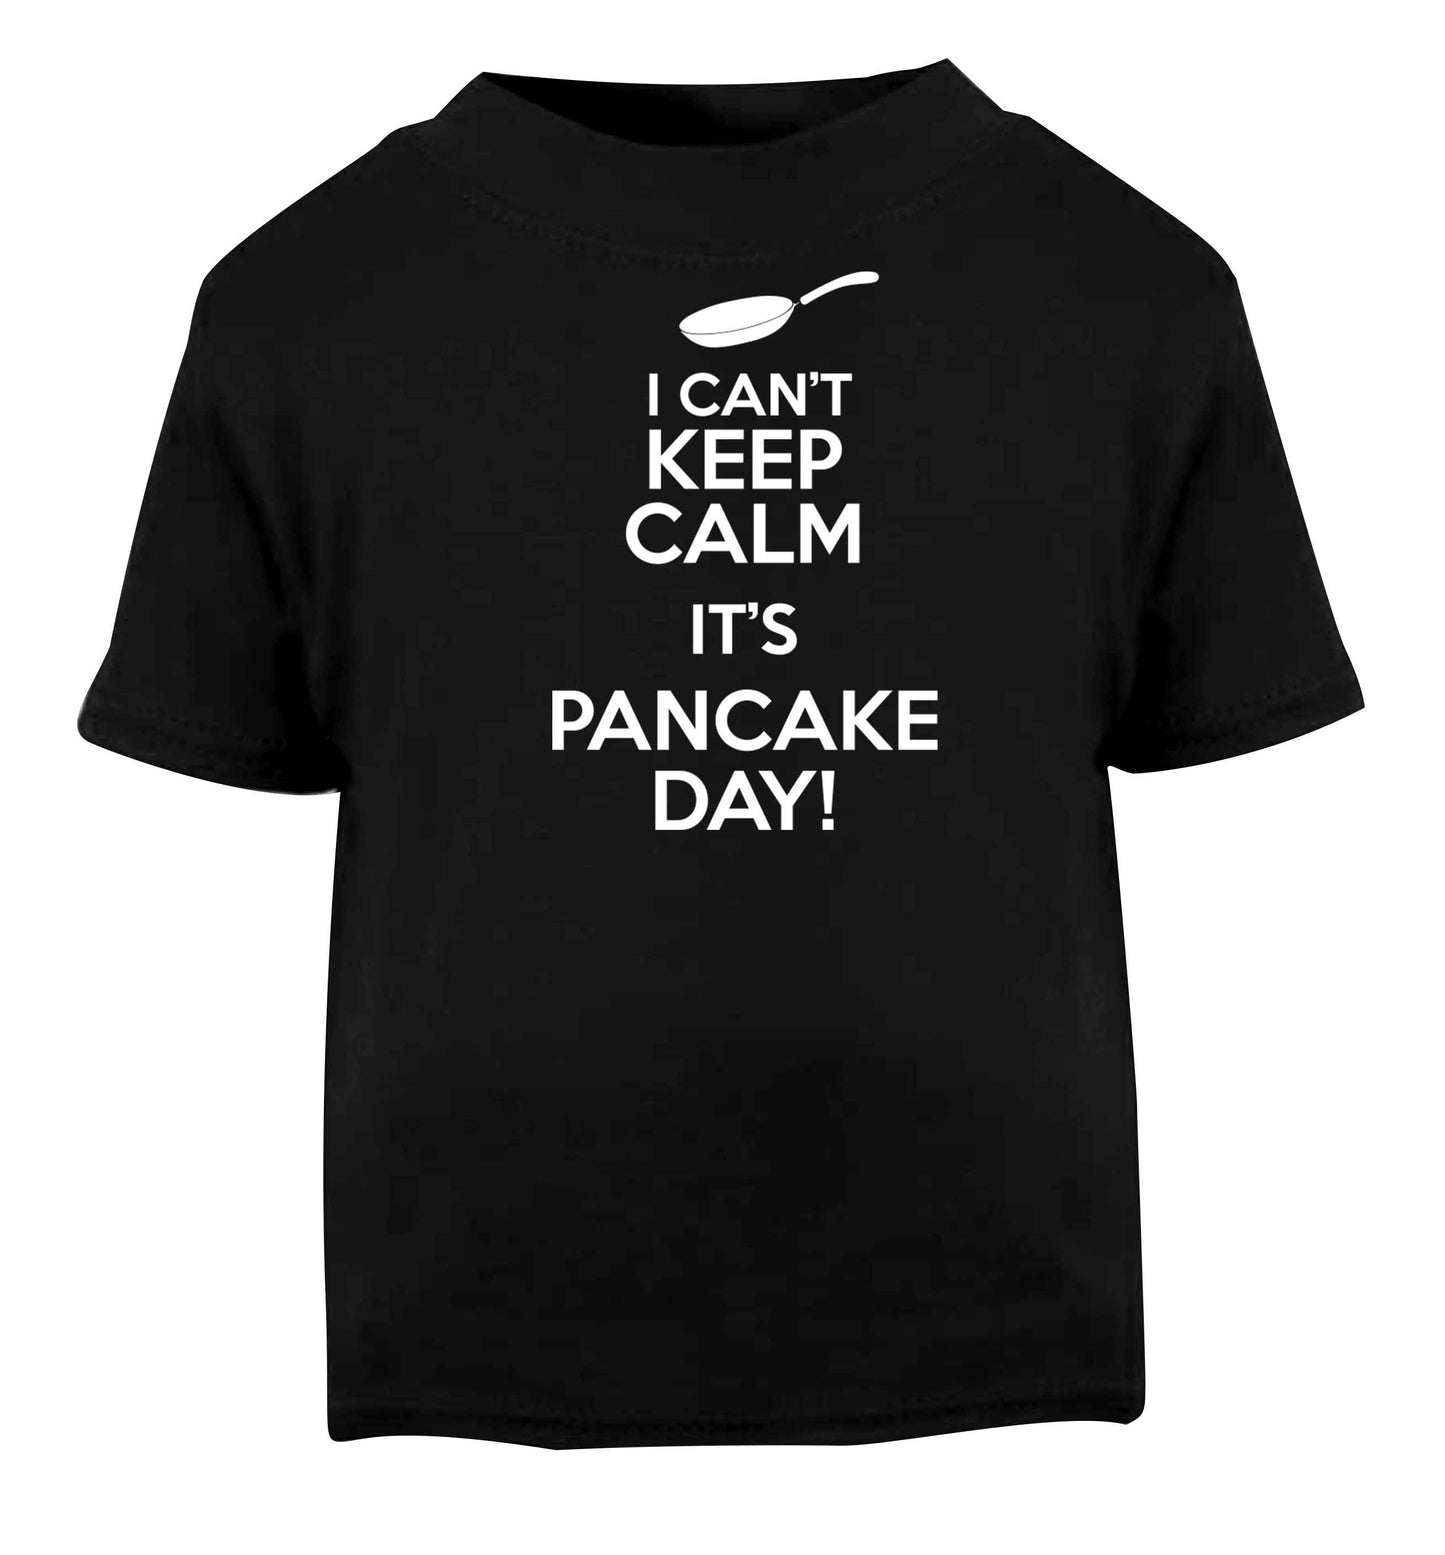 I can't keep calm it's pancake day! Black baby toddler Tshirt 2 years